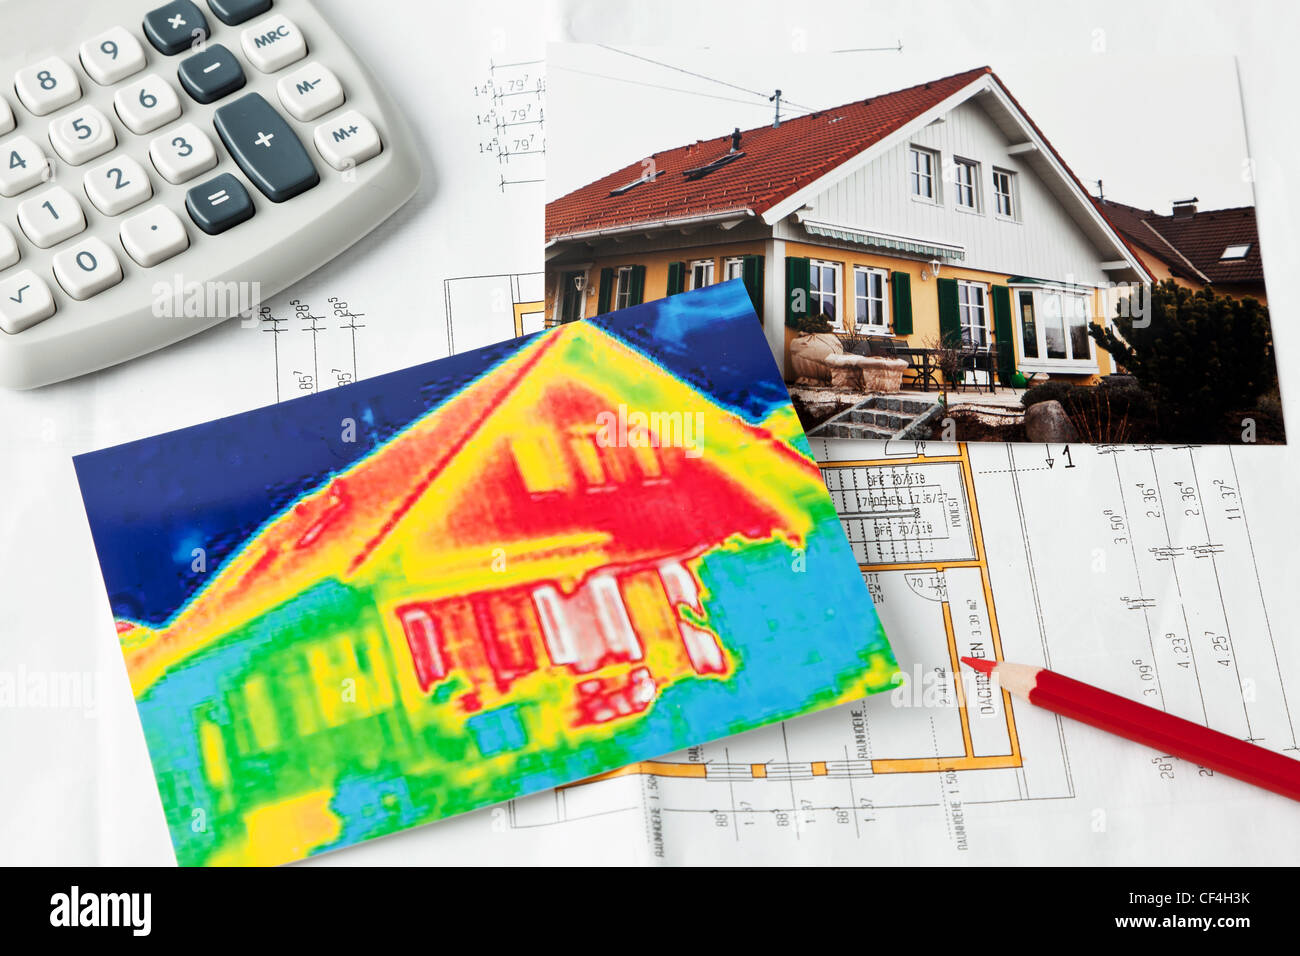 save energy by insulating. house with thermal imaging cameras photographed. Stock Photo